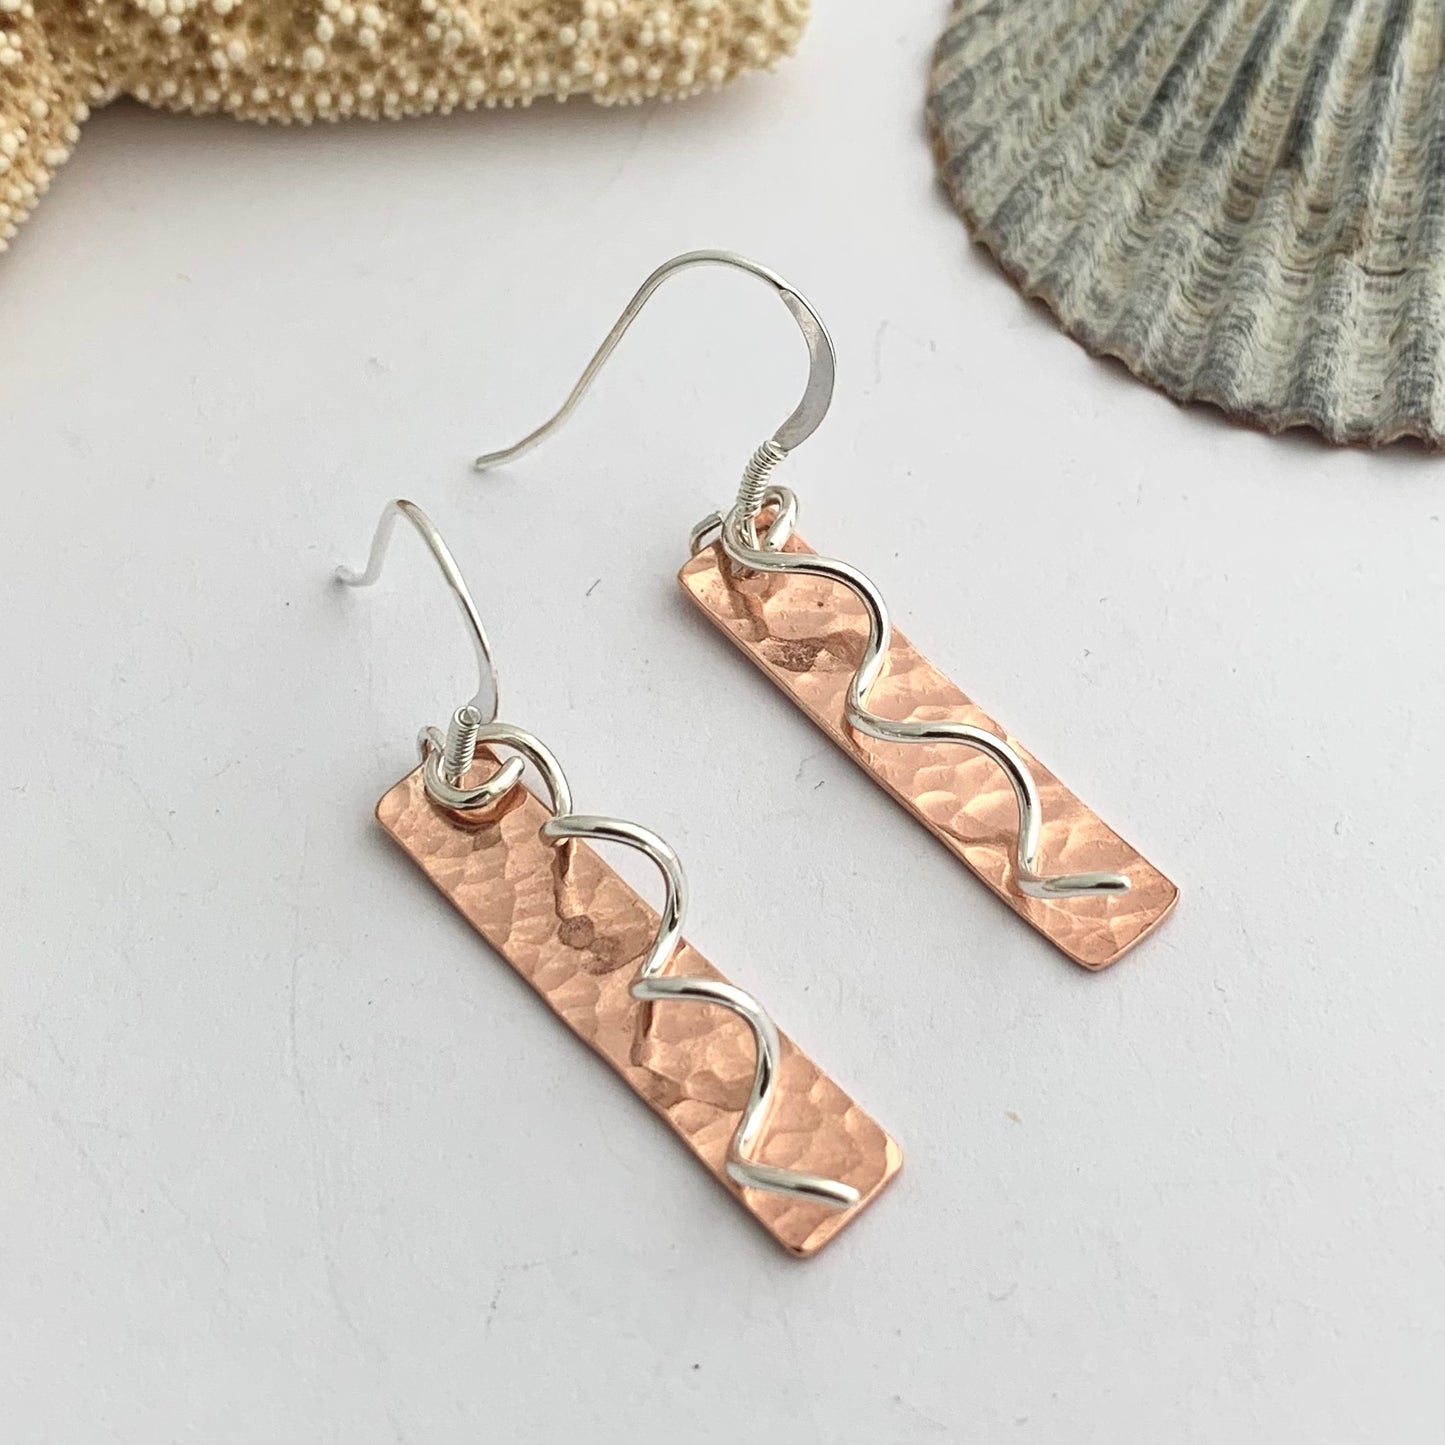 Copper Stick Earrings with Sterling Silver Spirals